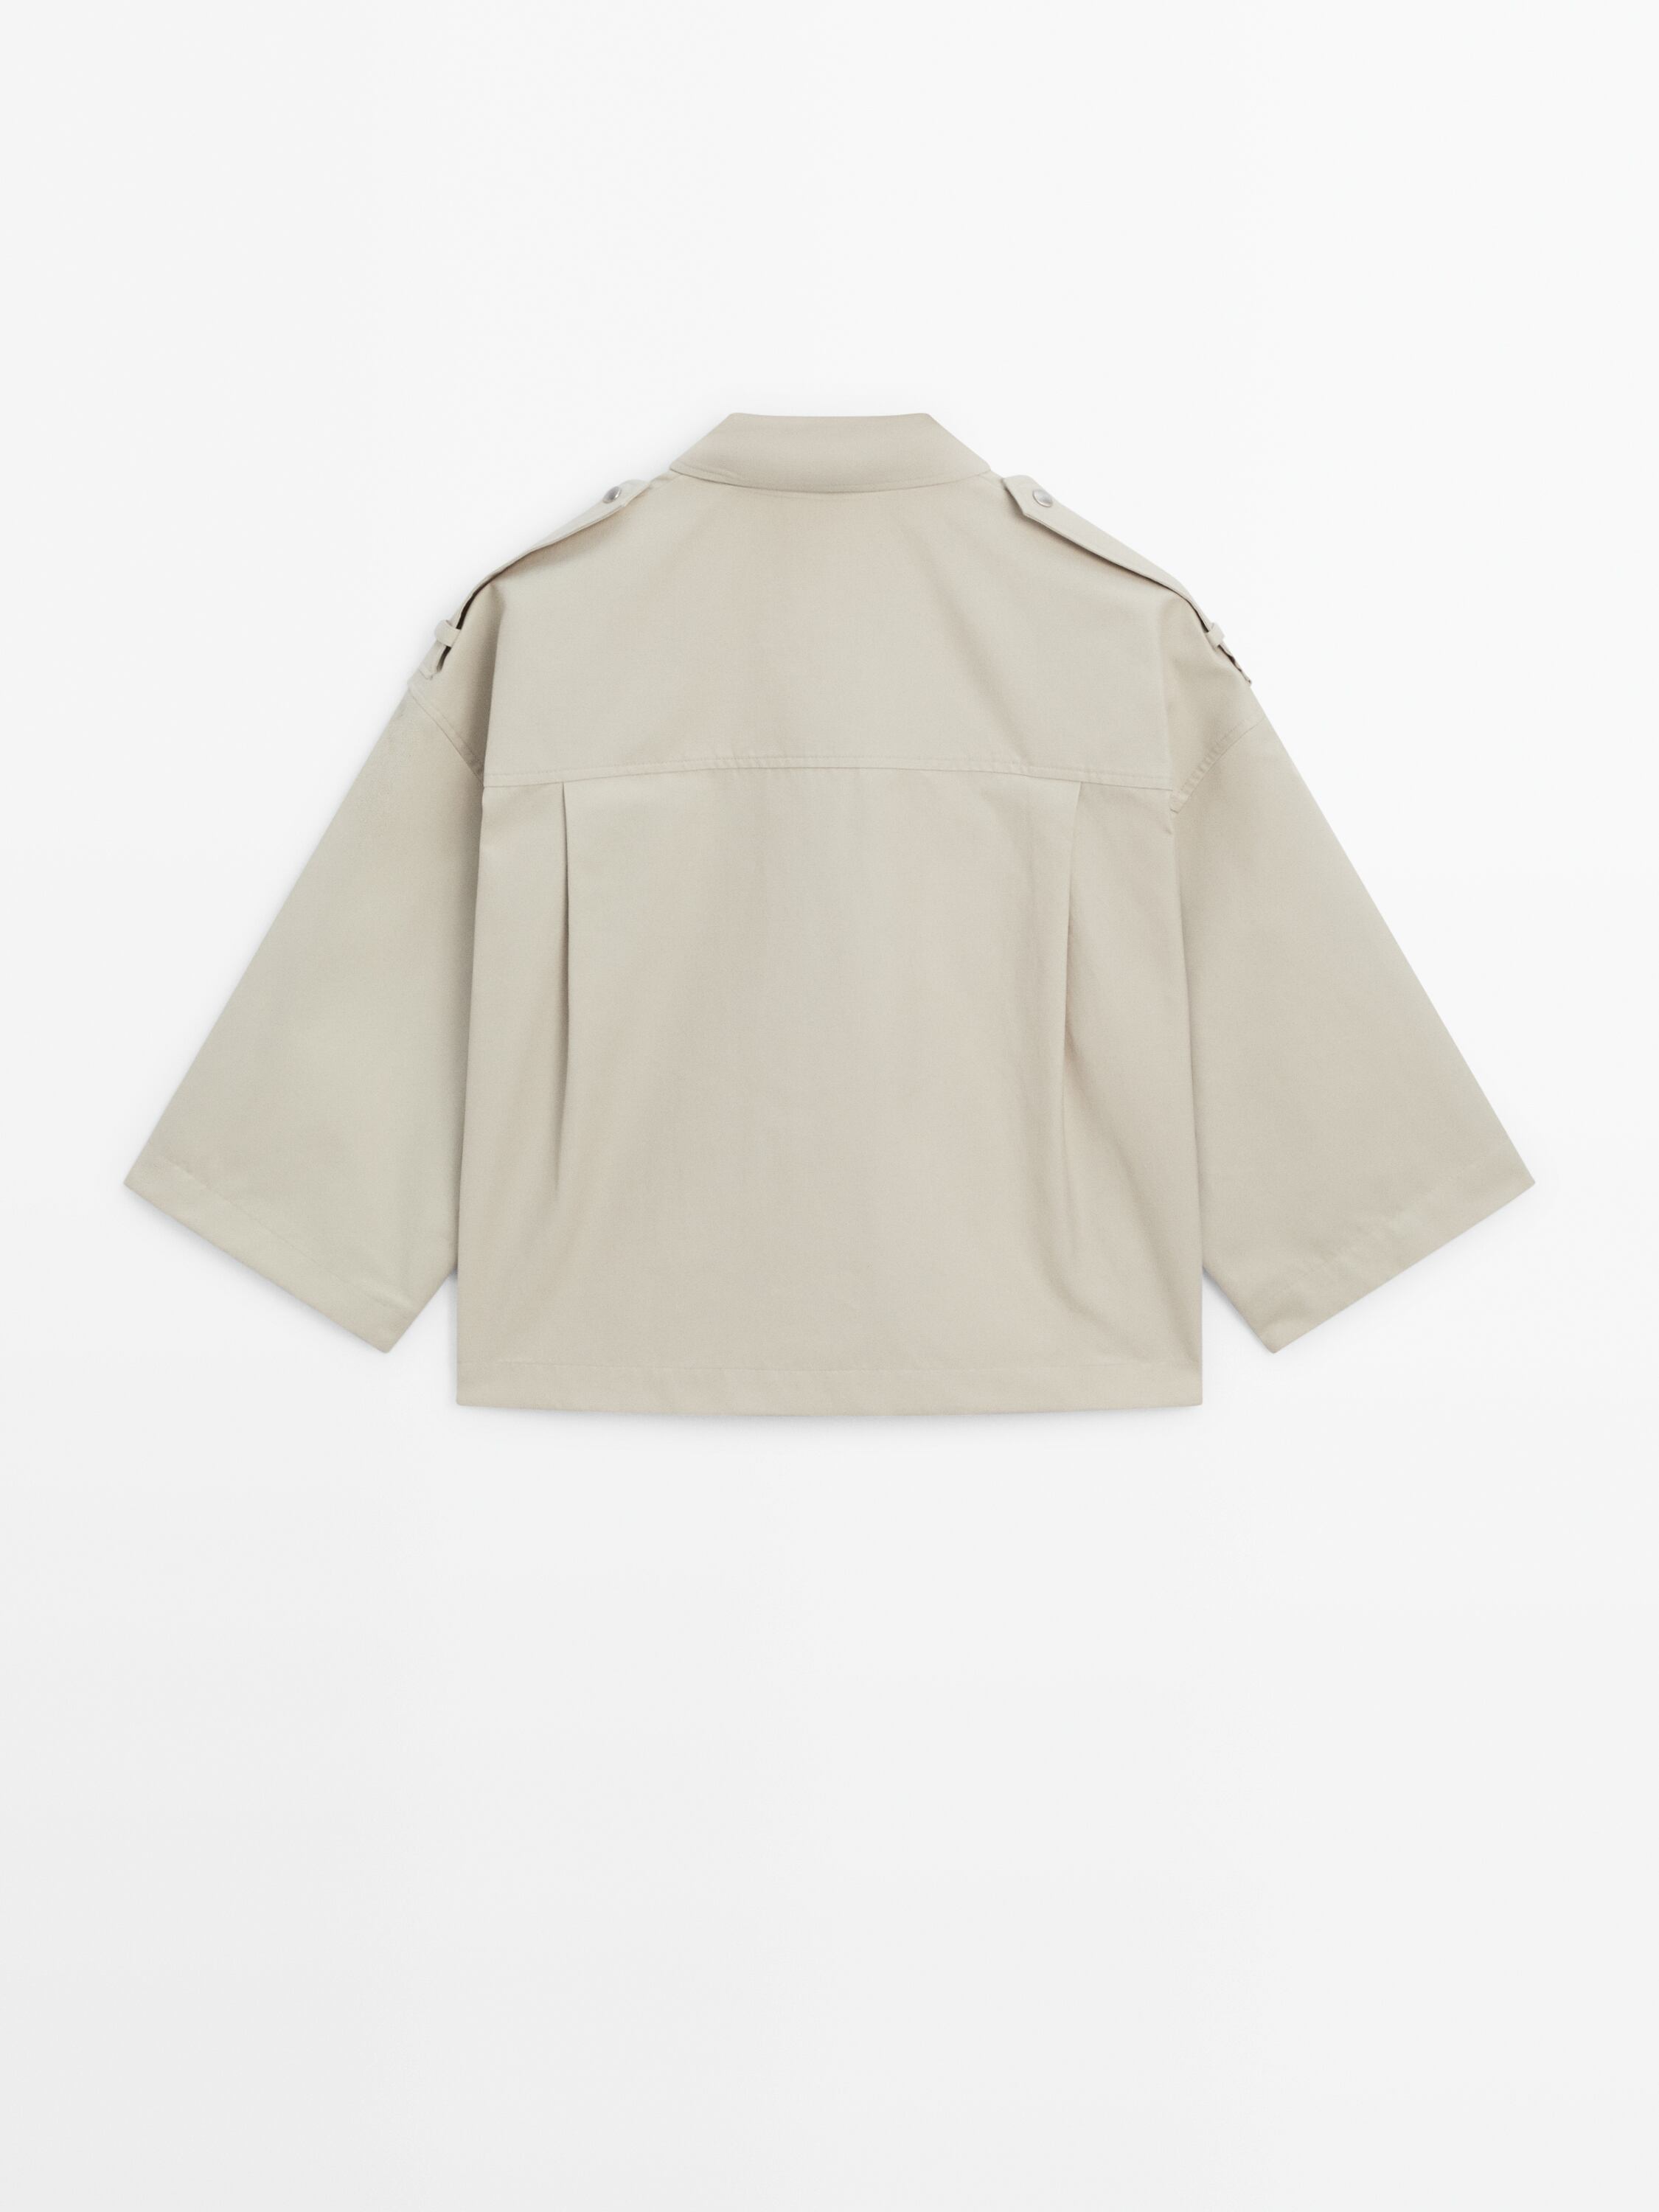 Cropped overshirt with pockets